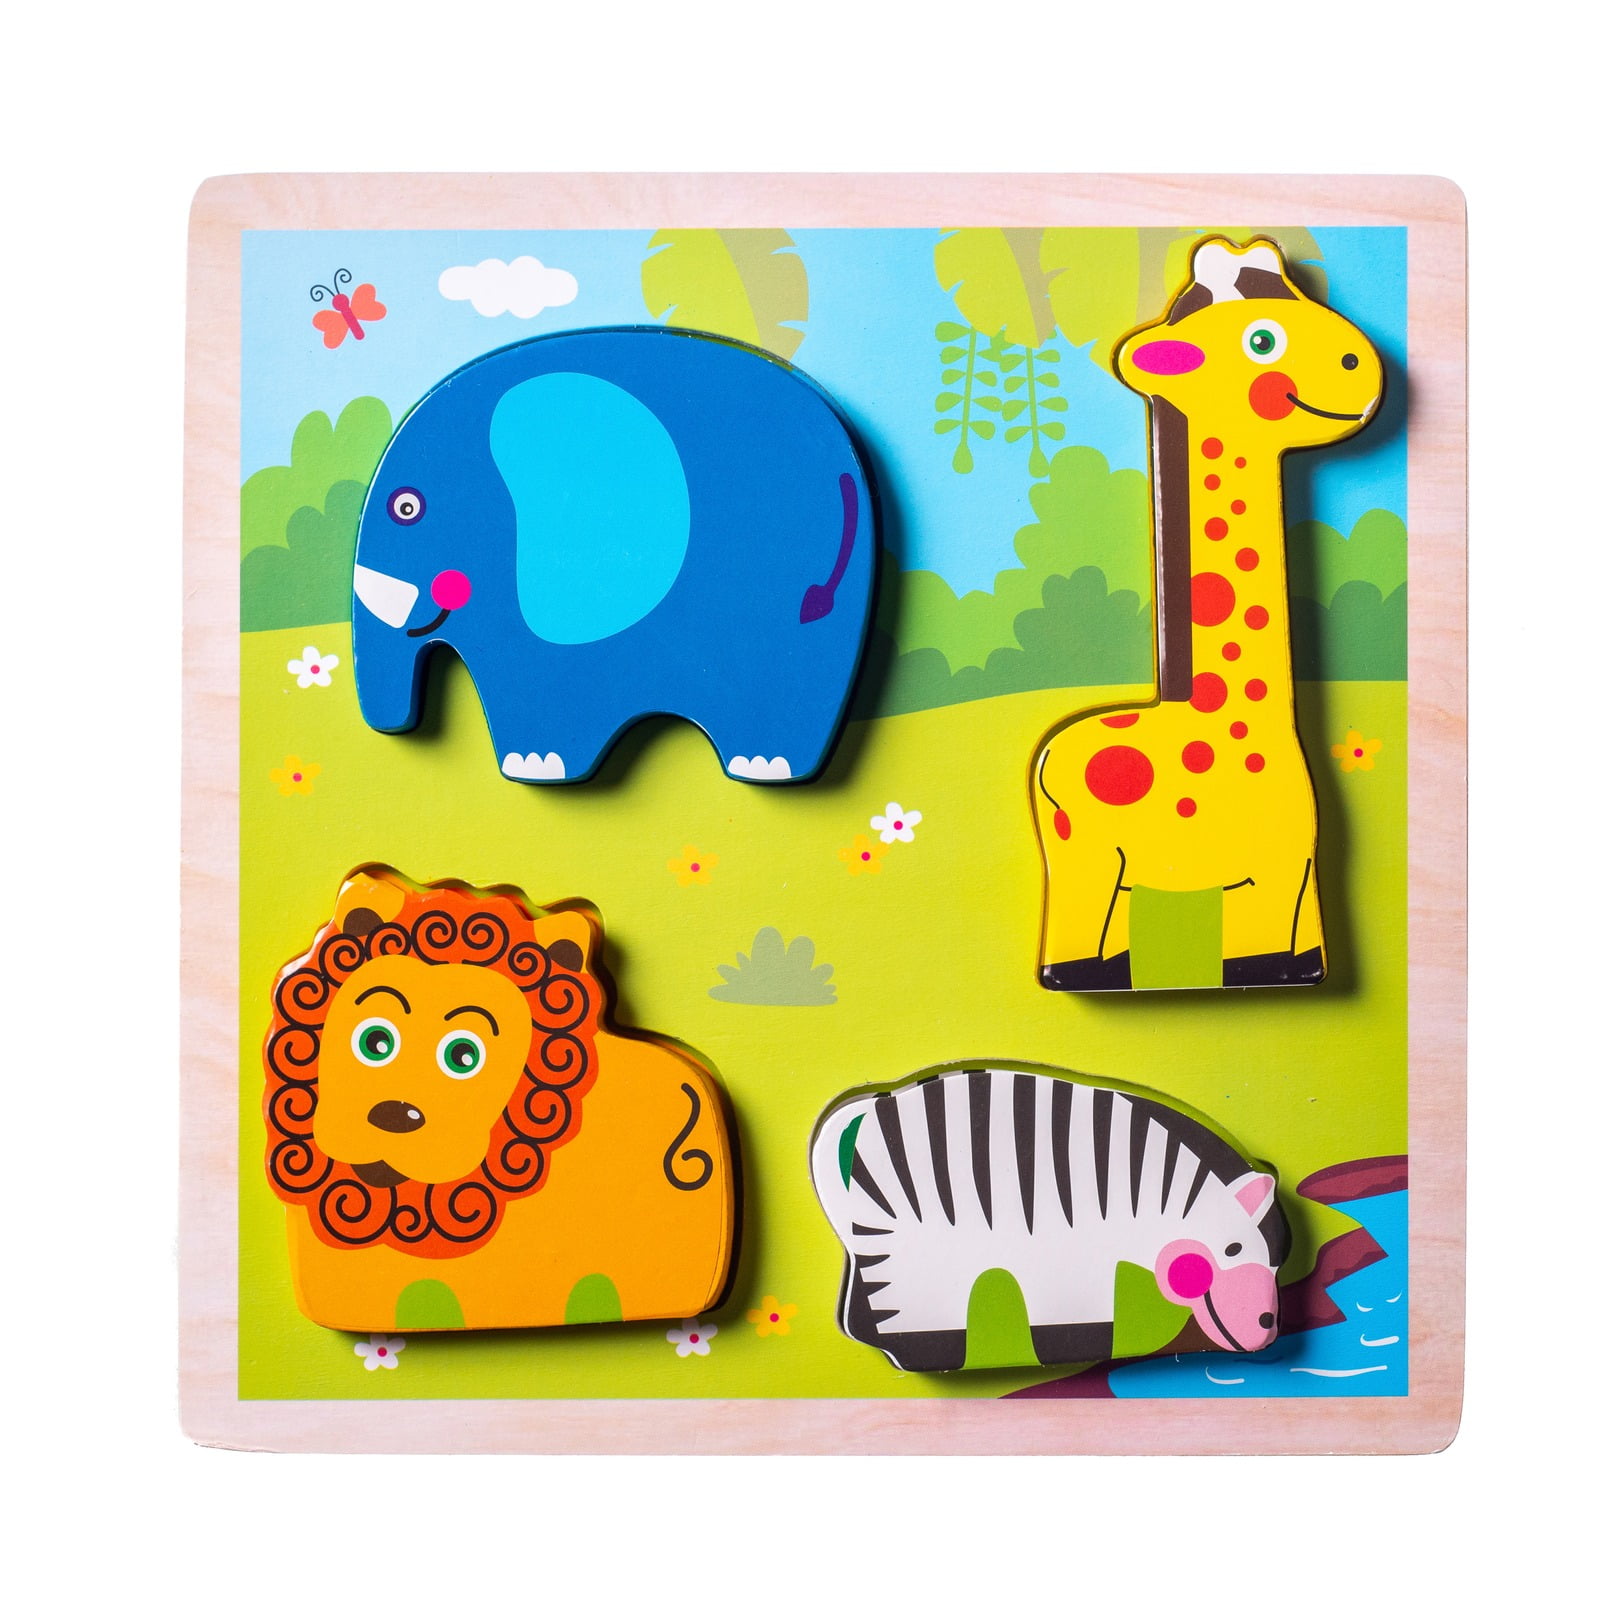 Eliiti Wooden Farm Animals Chunky Puzzle for Toddlers 2 to 4 Years Old Boy Girl 